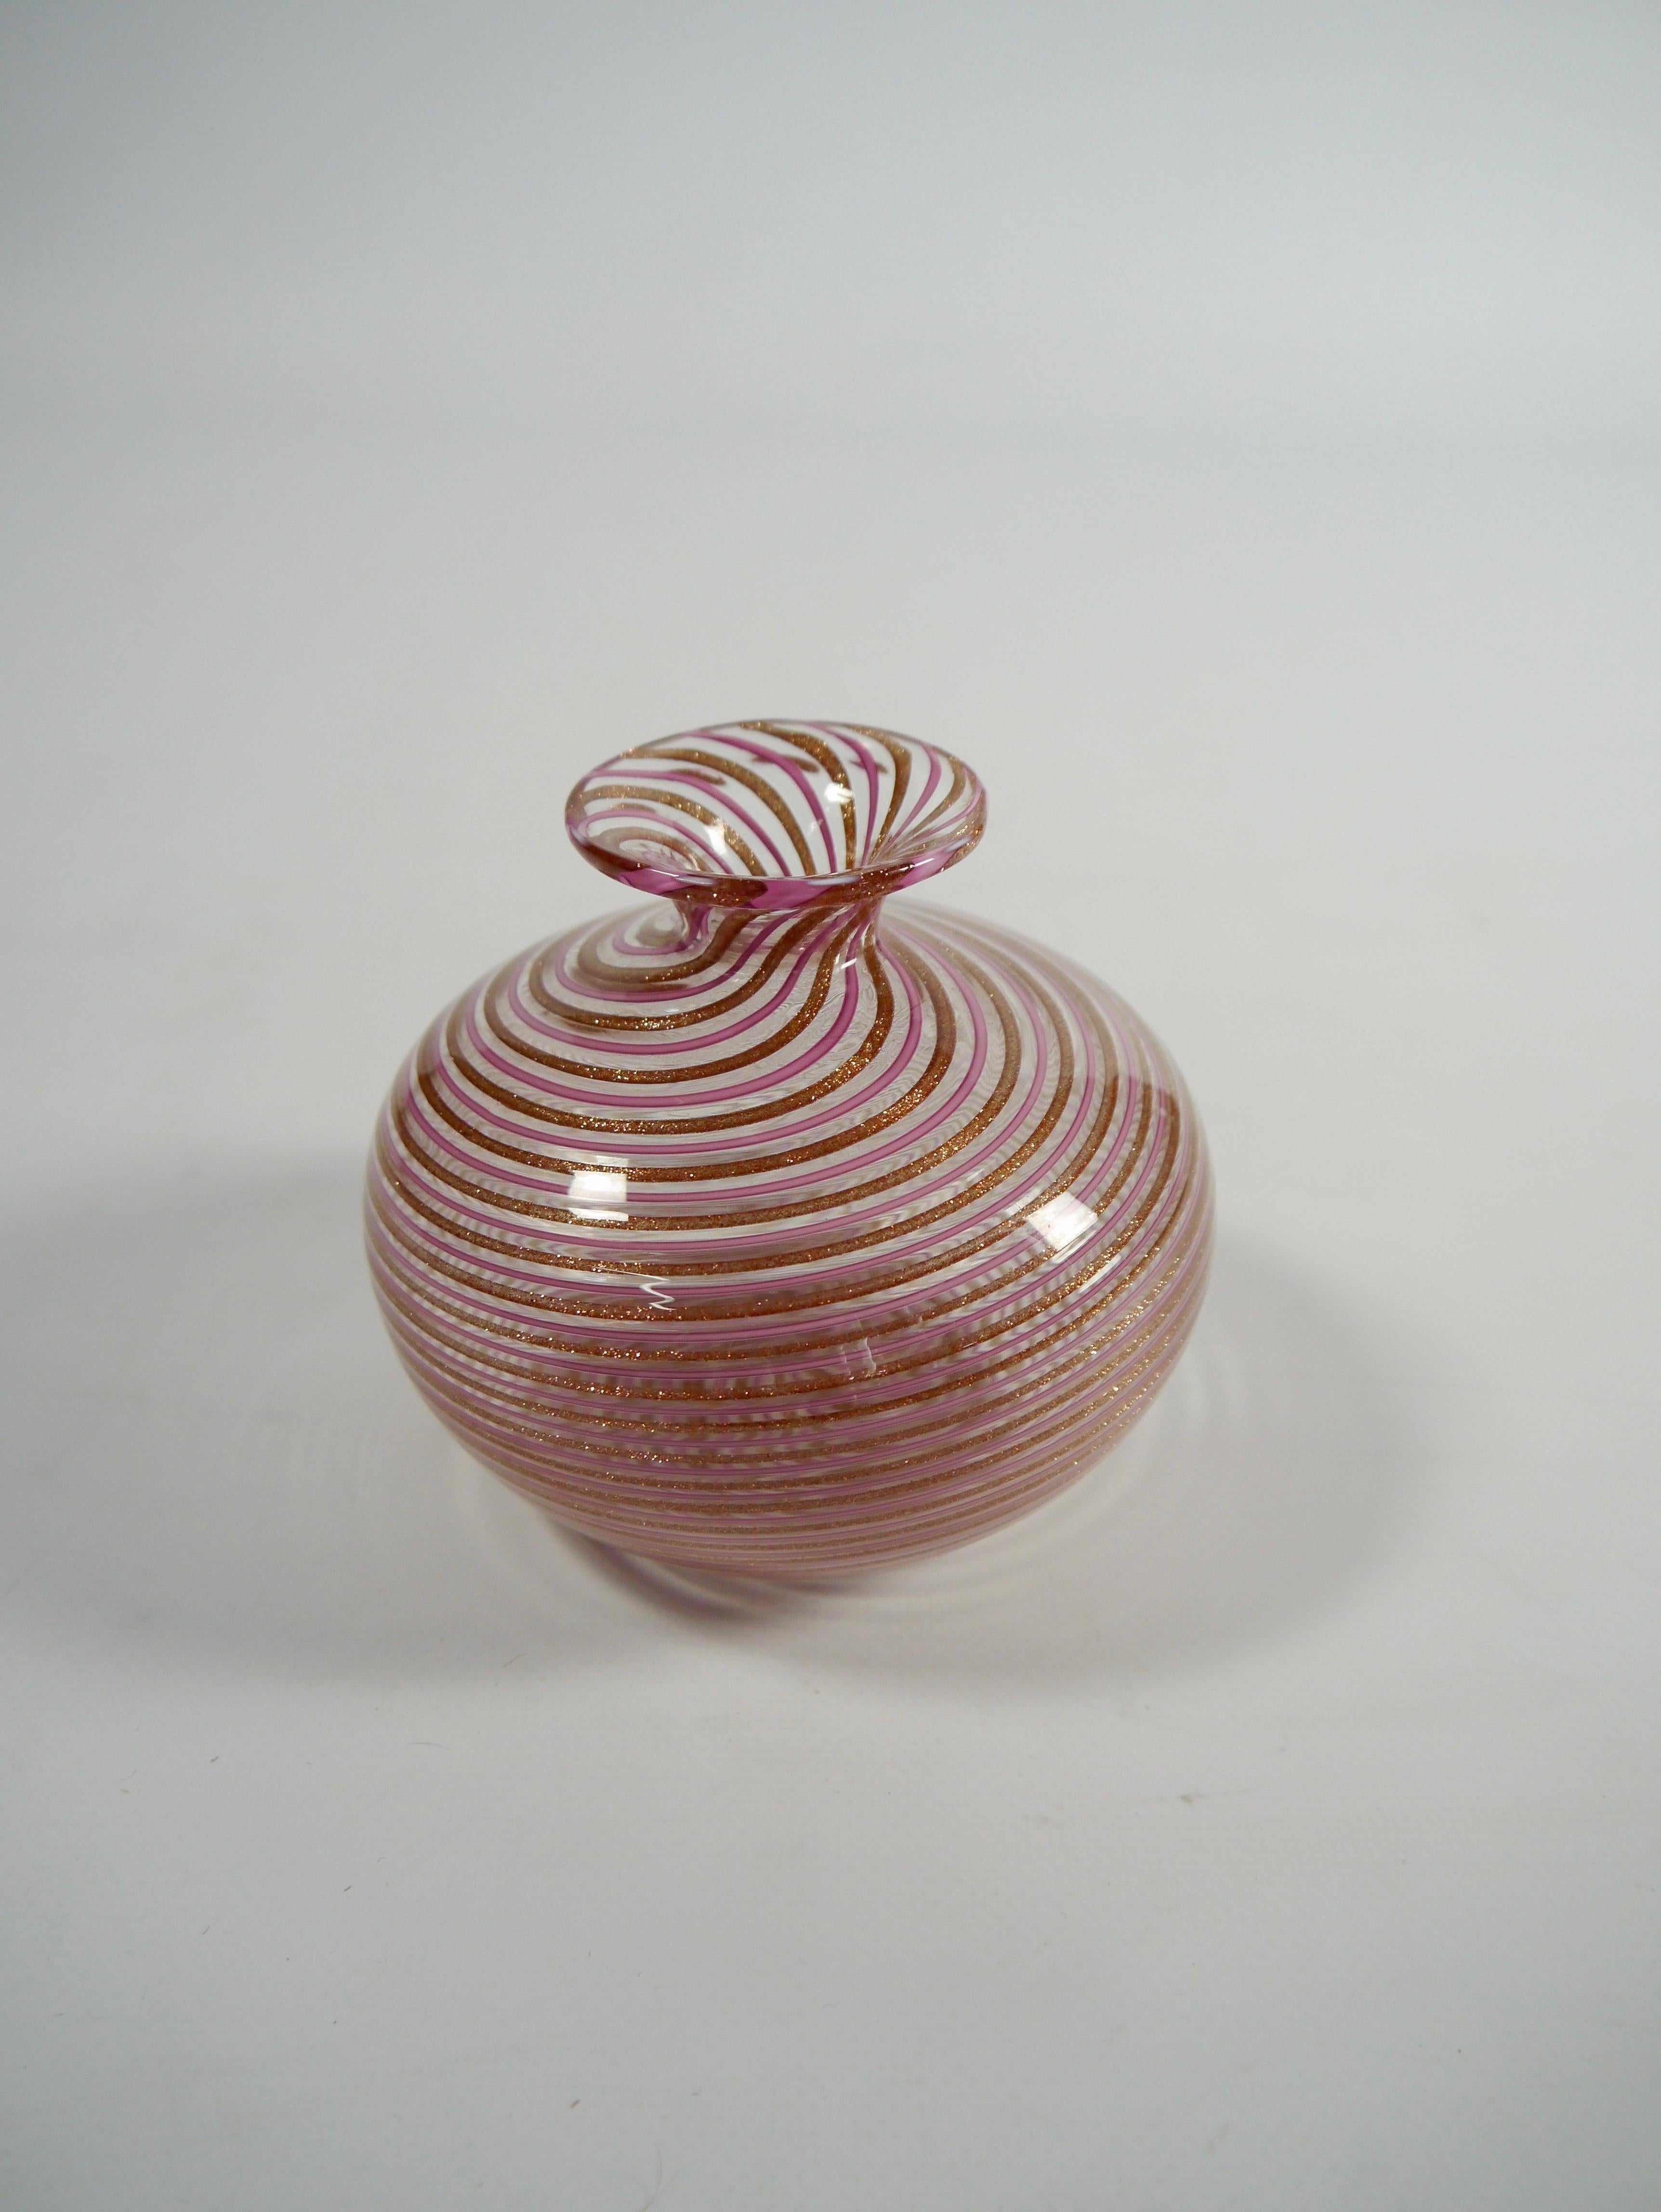 Pink, clear and gold leaf striped Murano glass vase, Aventurine and Mezza Filigrana technique. Most likely by Dino Martens for Aureliano Toso, Italy, 1950s.